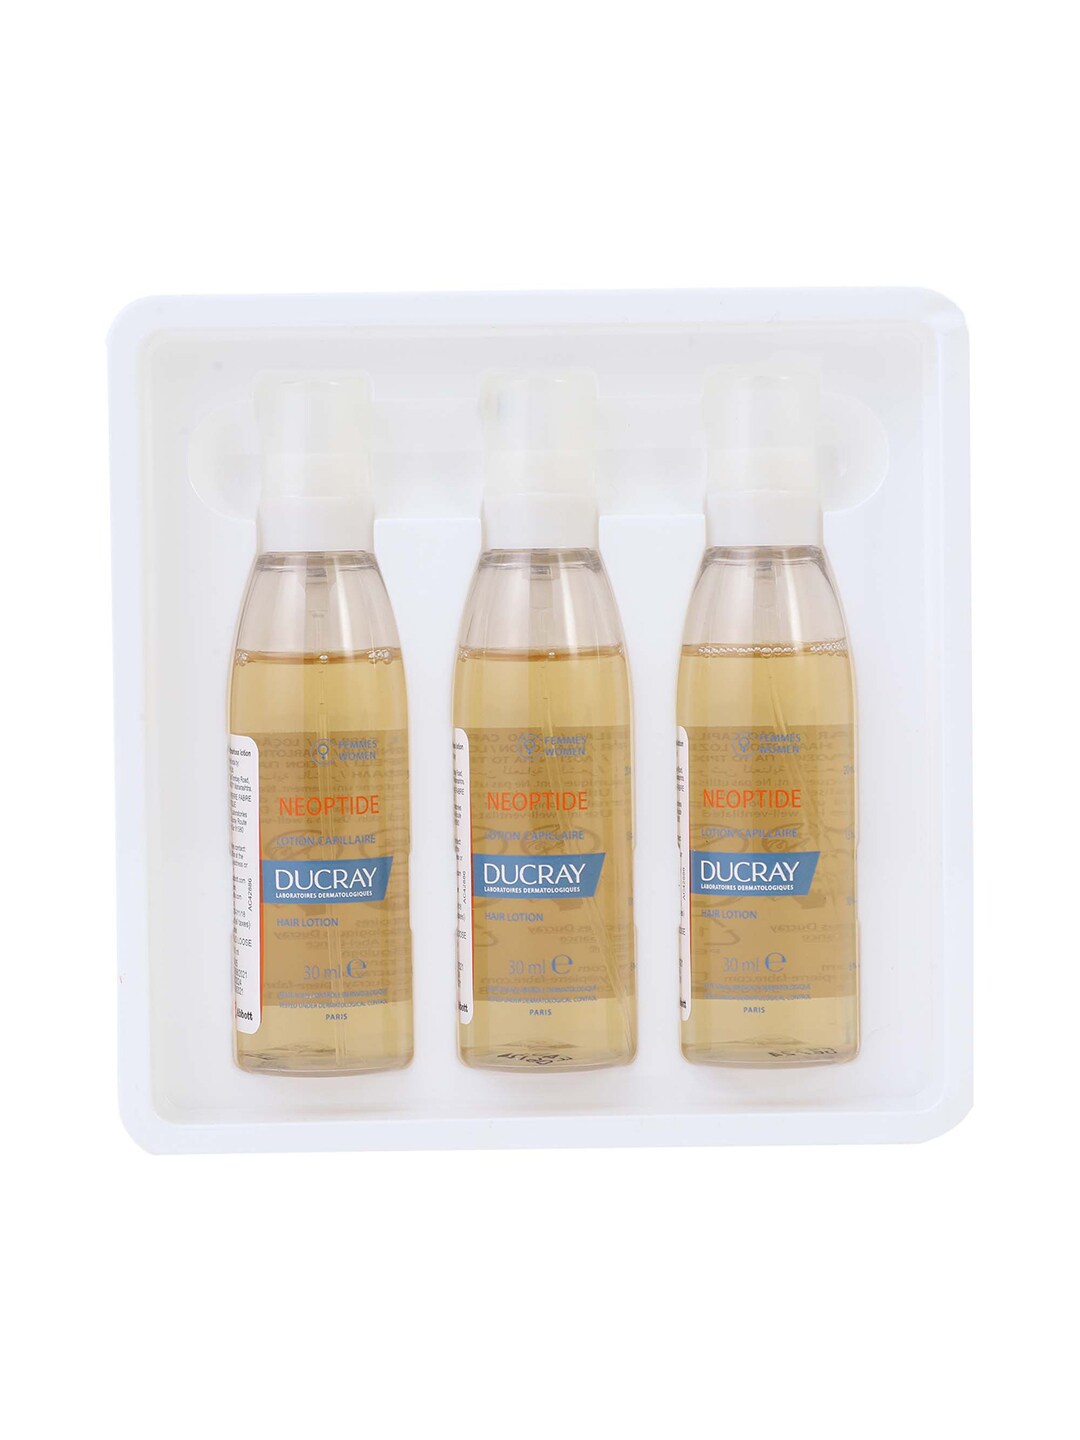 DUCRAY Set of 3 Neoptide Hair Lotions - 30 ml Each Price in India